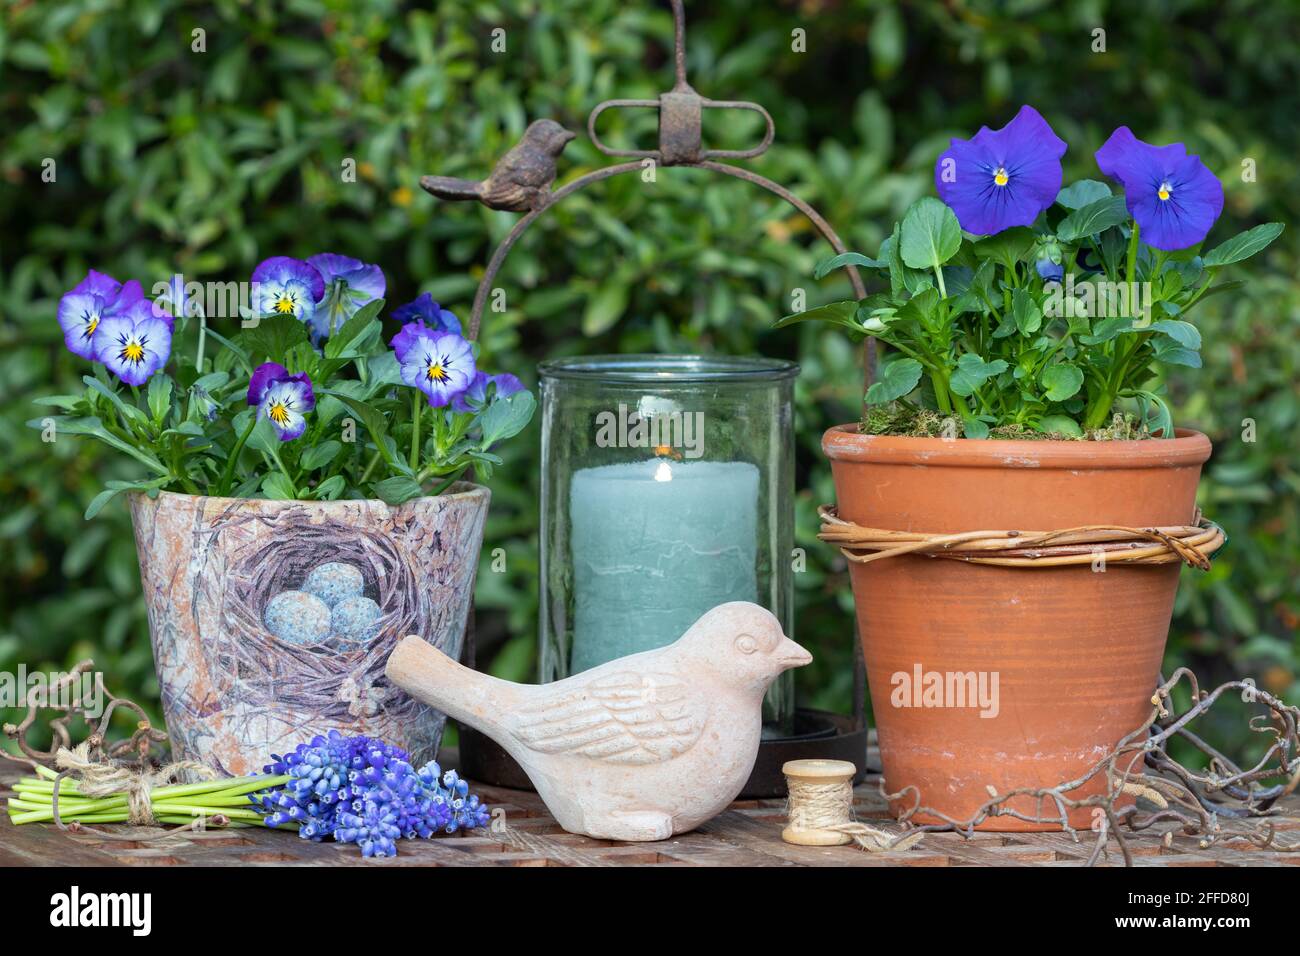 spring garden decoration with blue viola flowers and terracotta bird Stock Photo